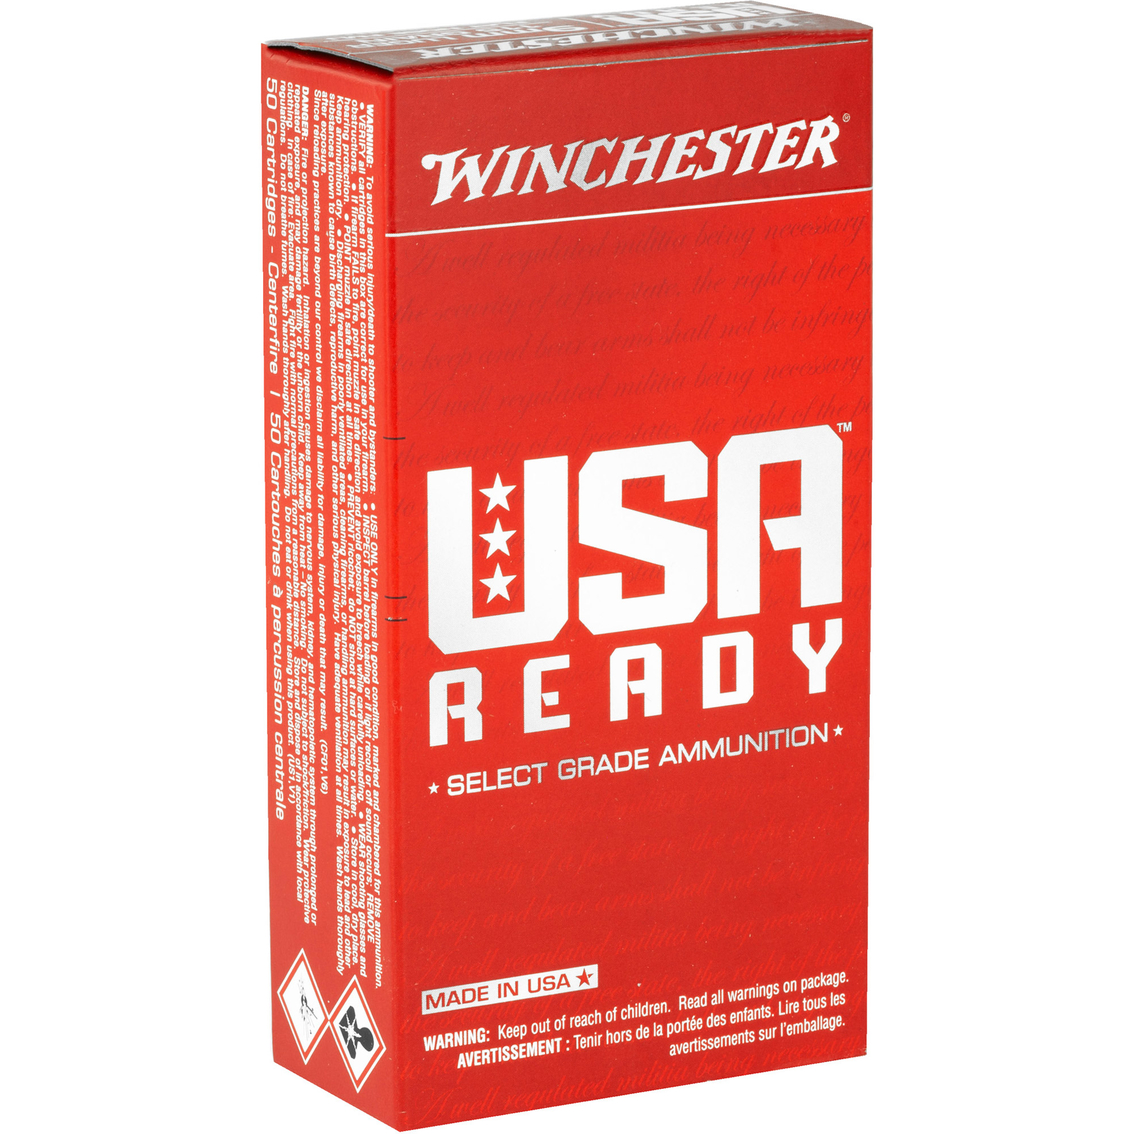 Winchester USA Ready 9mm 115 Gr. FMJ 50 Rounds - Image 2 of 4